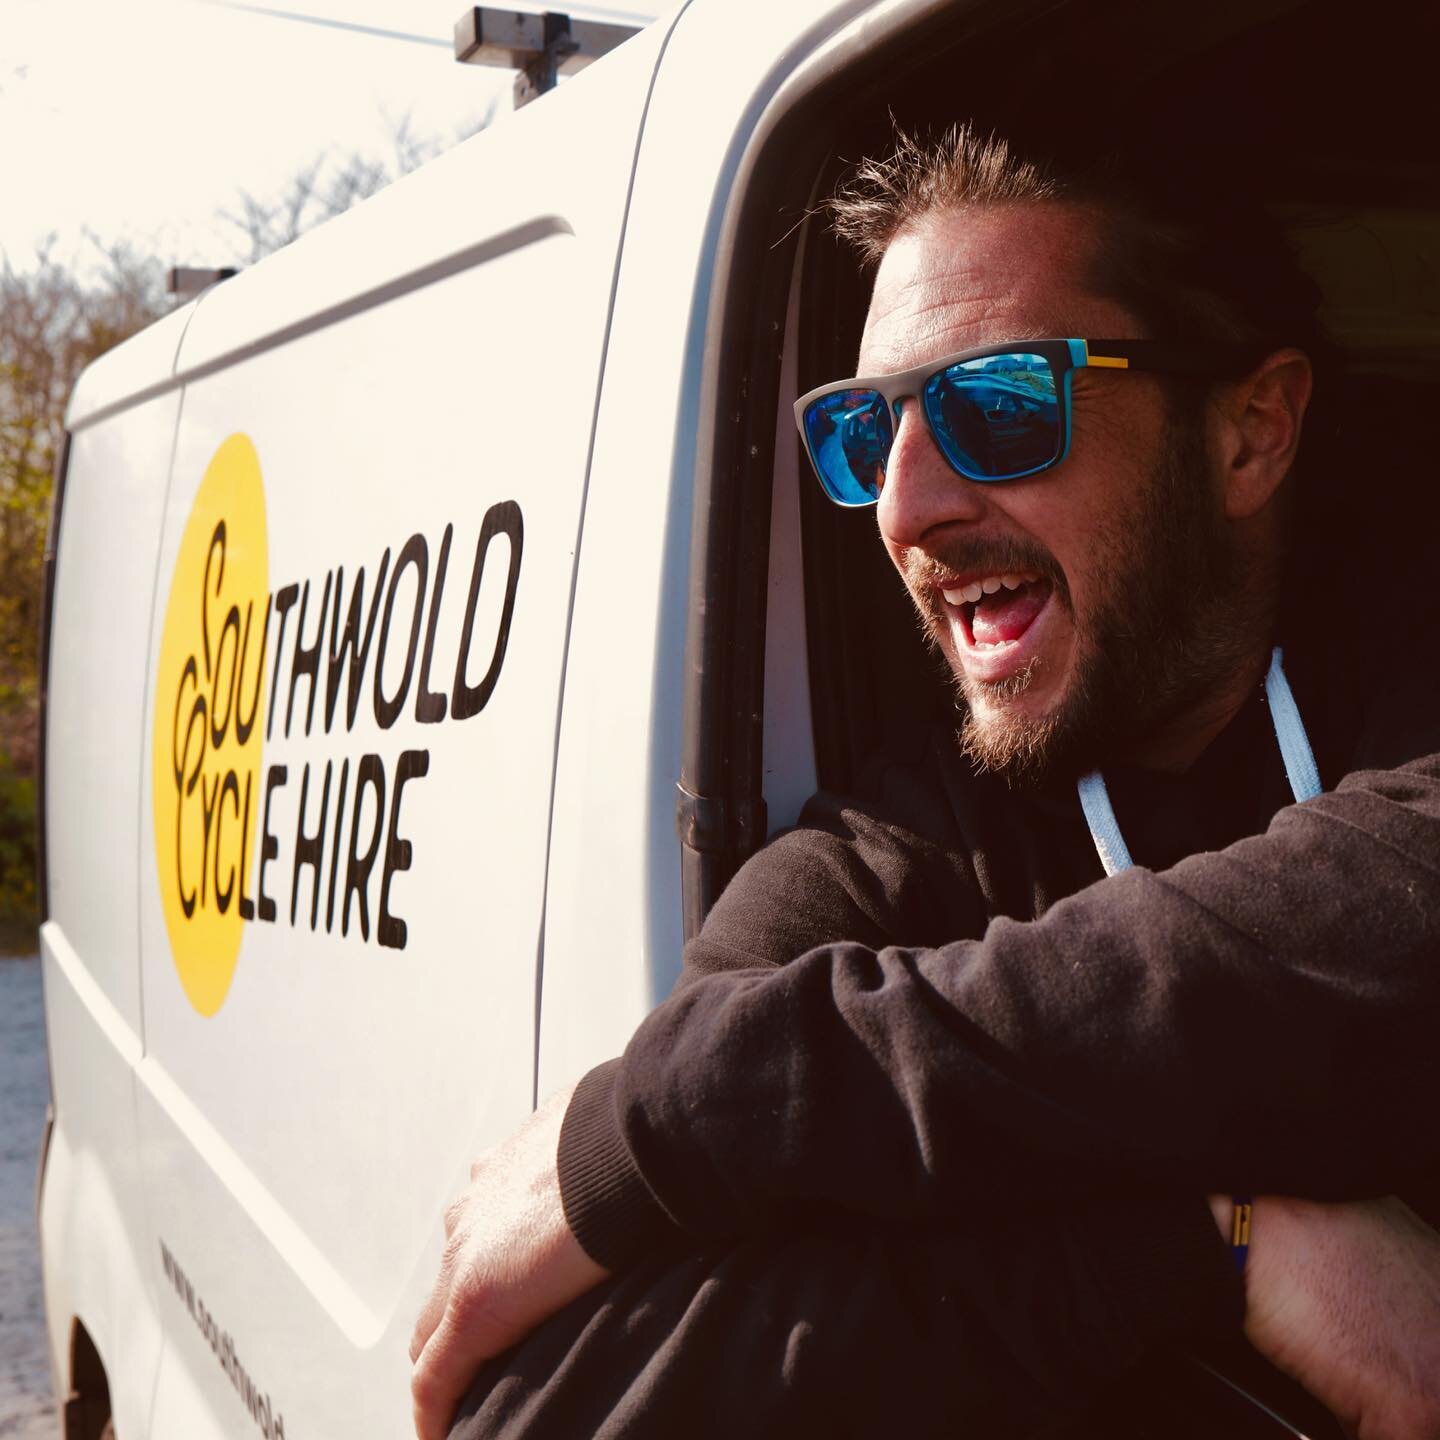 A familiar site around town: our main man Jason delivering rental bikes to holiday homes around Southwold and the local area.

Photo by @rosielitterick 

#southwoldsuffolk #cyclesuffolk #cyclesouthwold #thingstodosouthwold #southwoldcycling